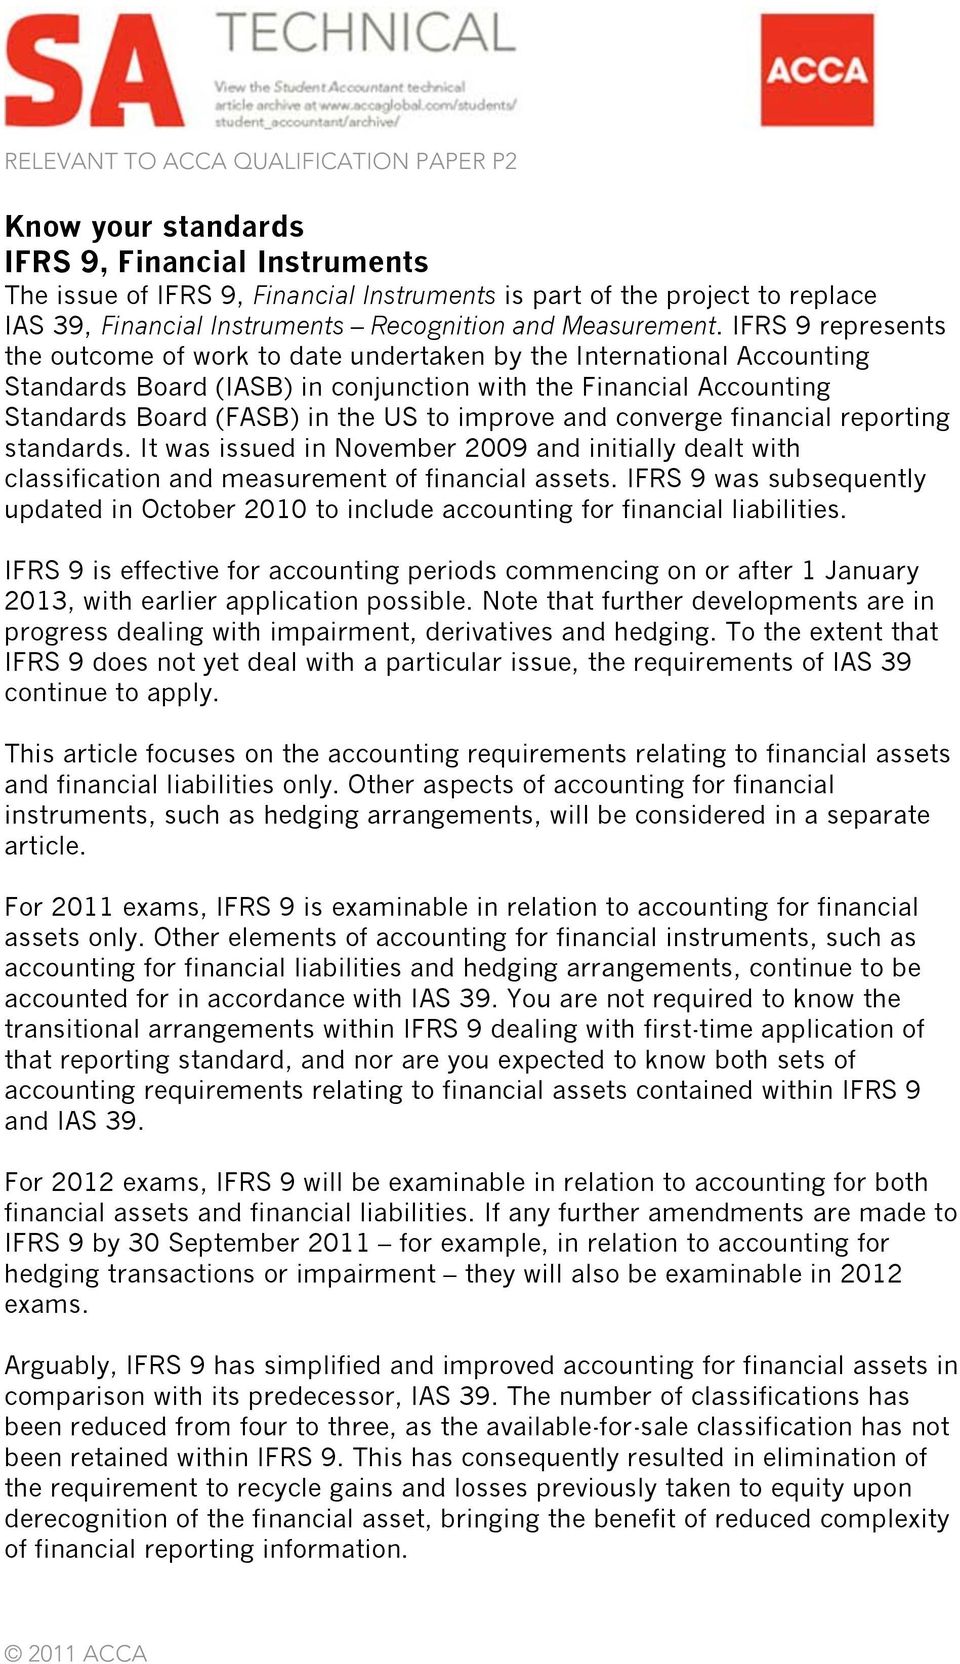 Know Your Standards Ifrs 9 Financial Instruments Pdf Free Download